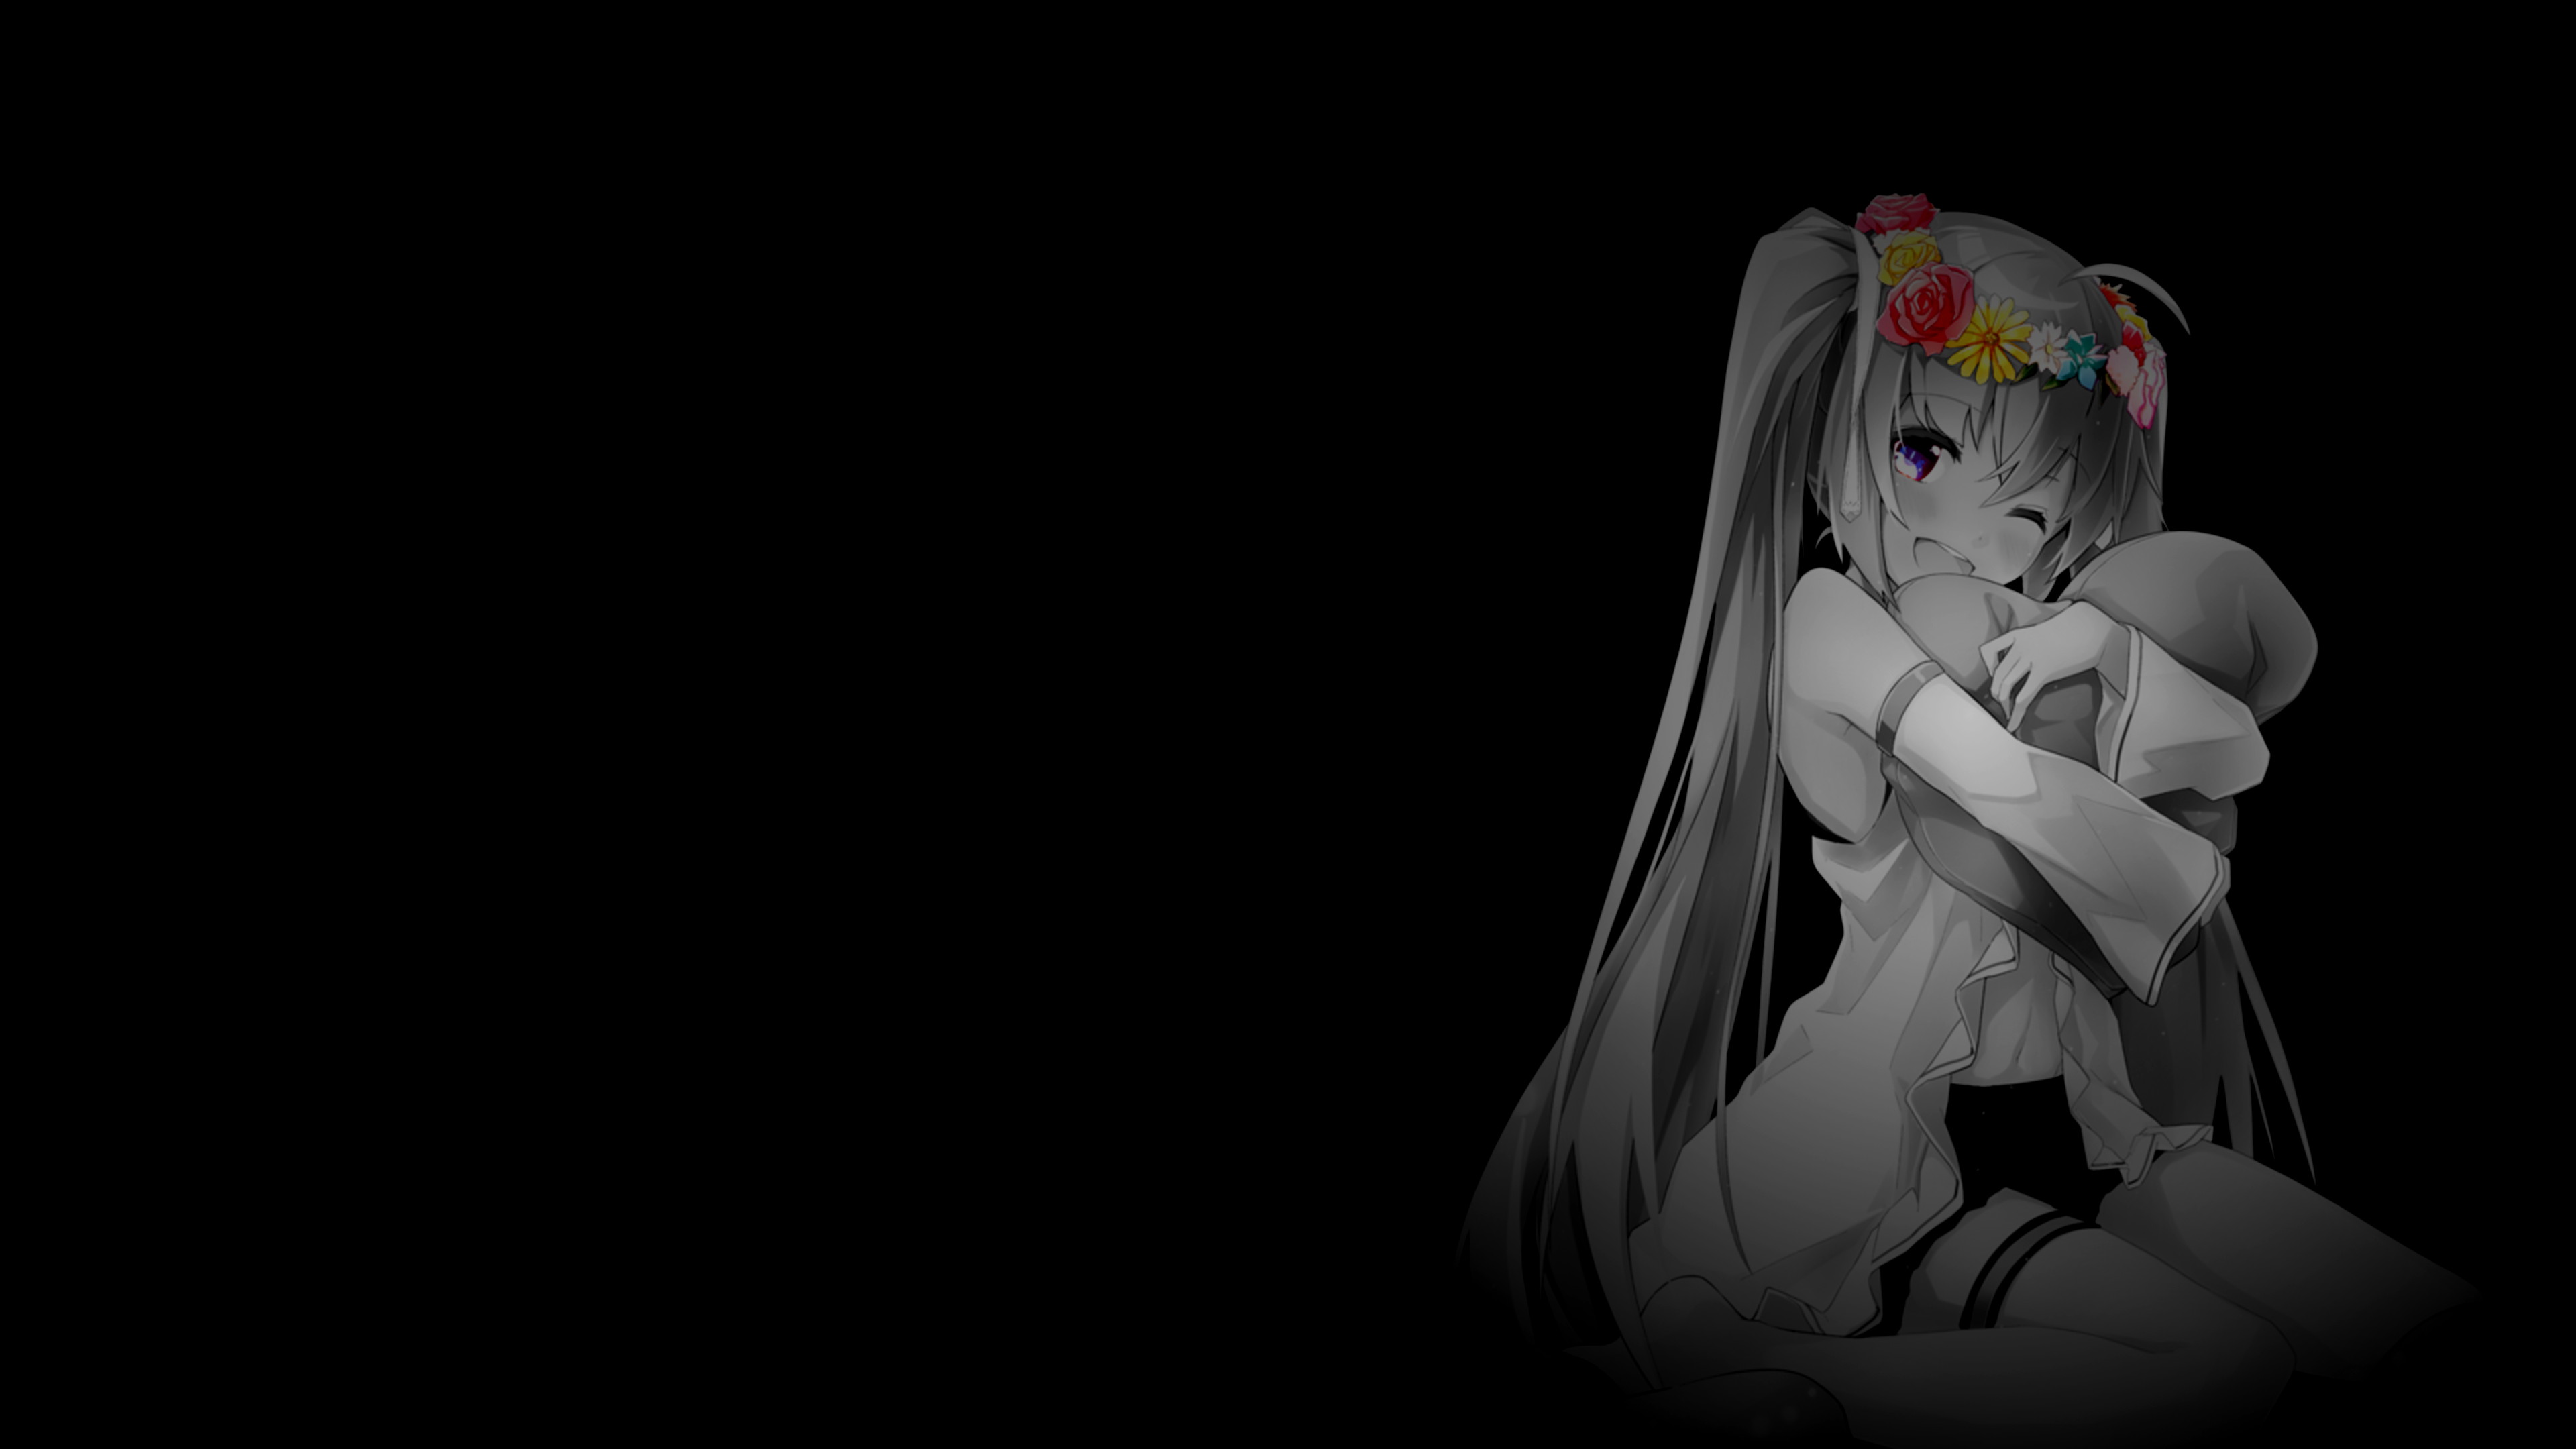 Anime 3840x2160 anime girls selective coloring simple background dark background